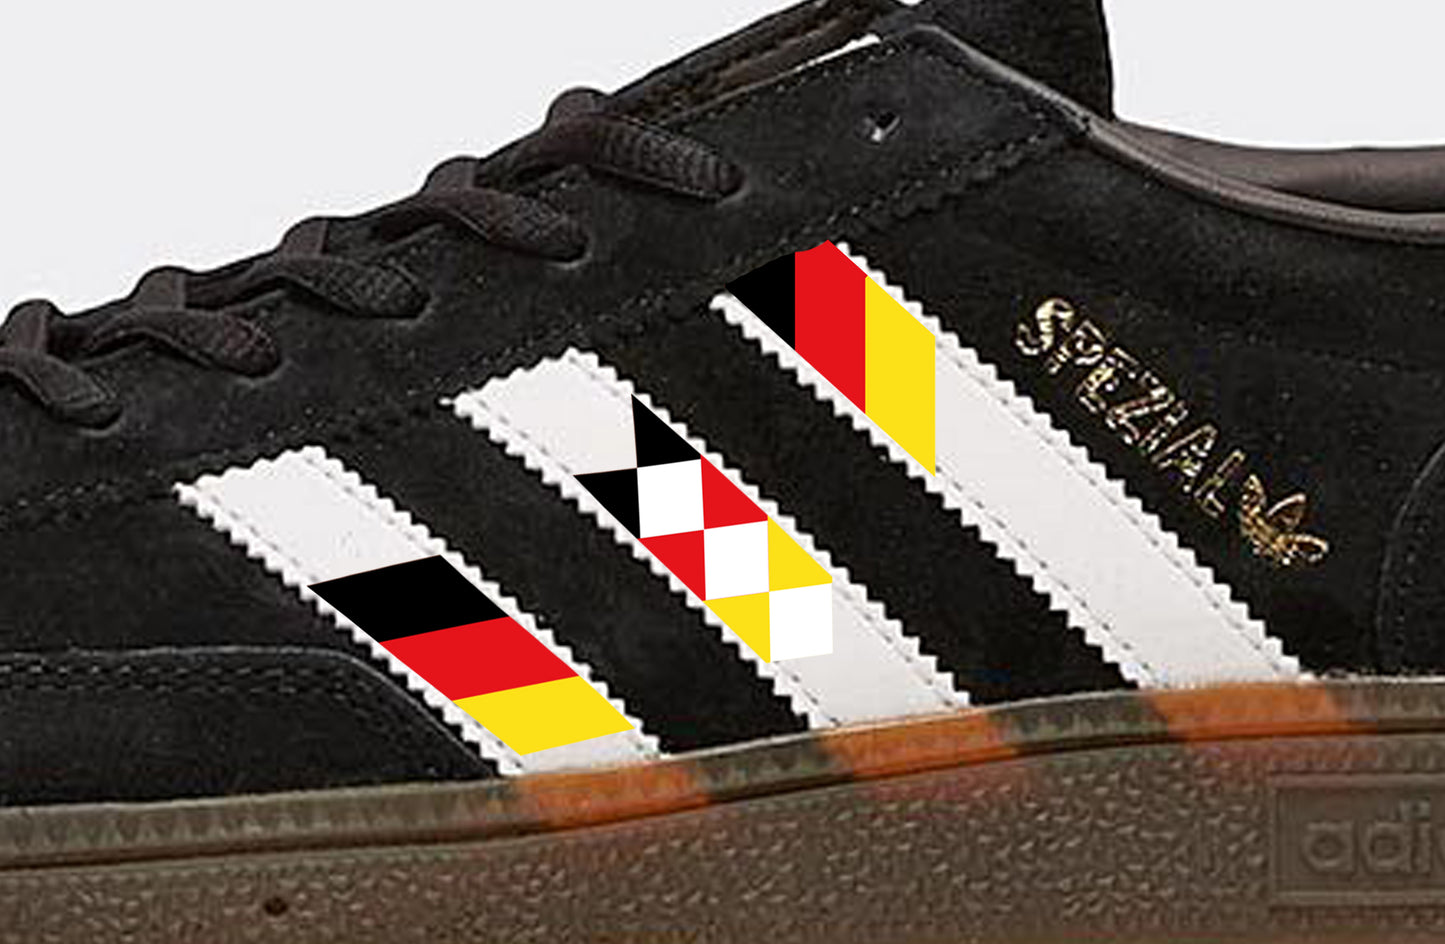 Limited edition Adidas Deutschland / Germany black retro spezial trainers / sneakers